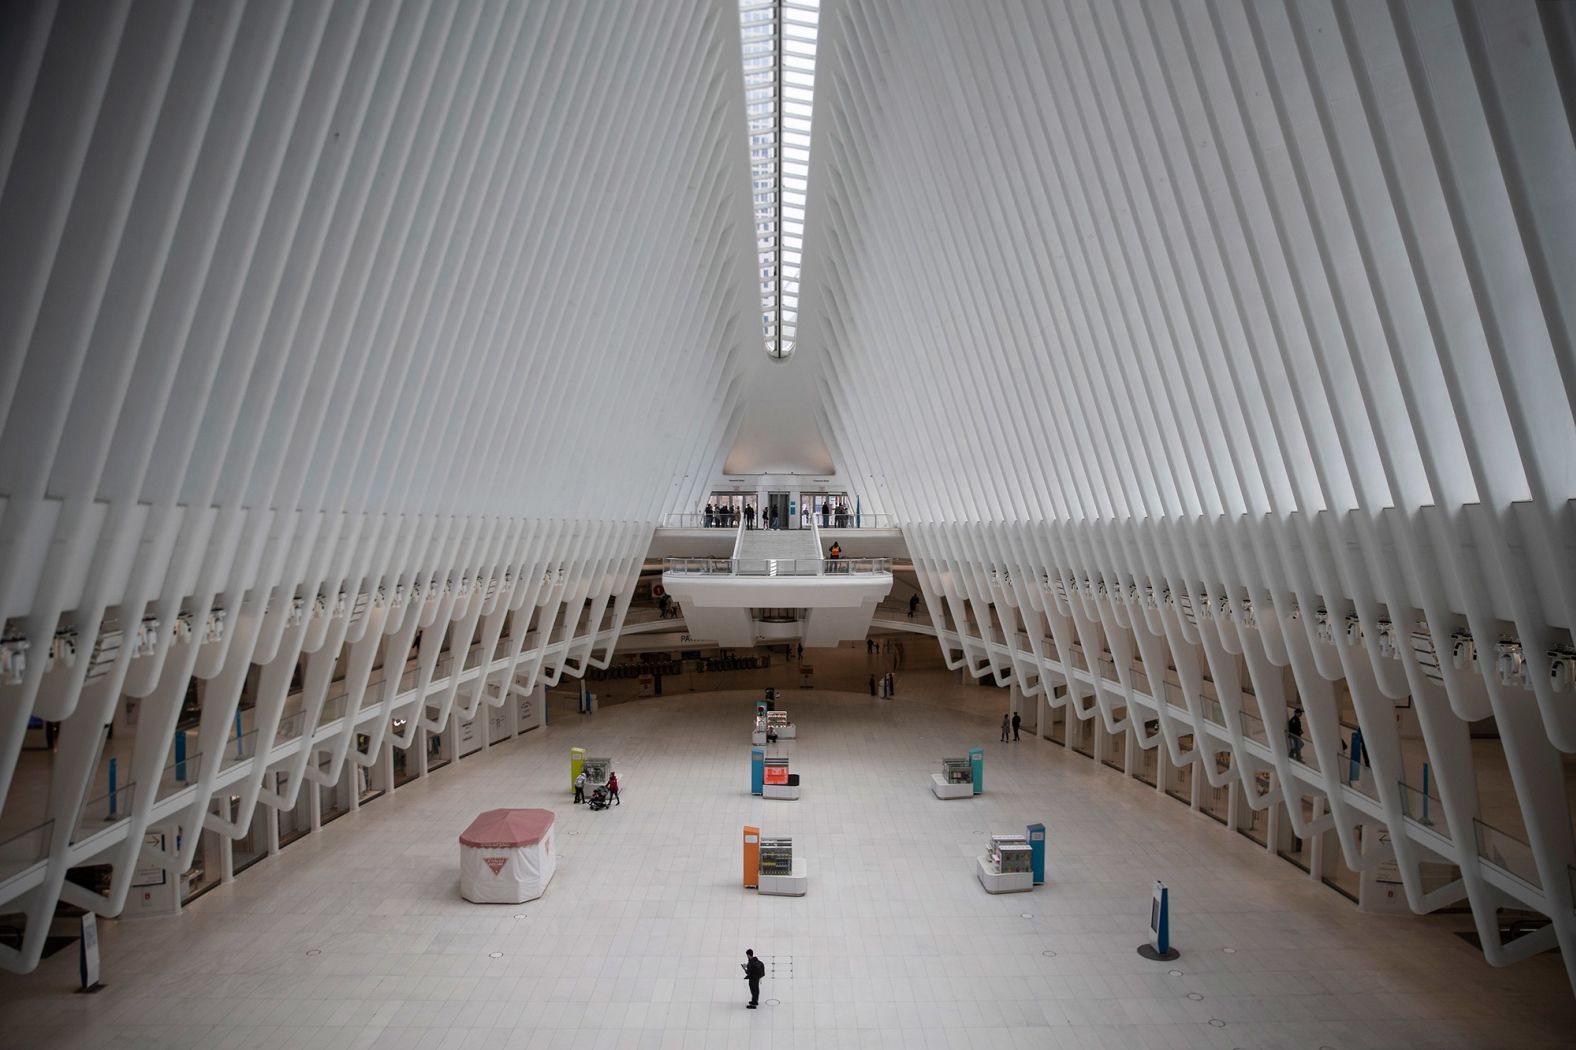 The Oculus transportation hub in New York was mostly devoid of commuters and tourists on March 15.